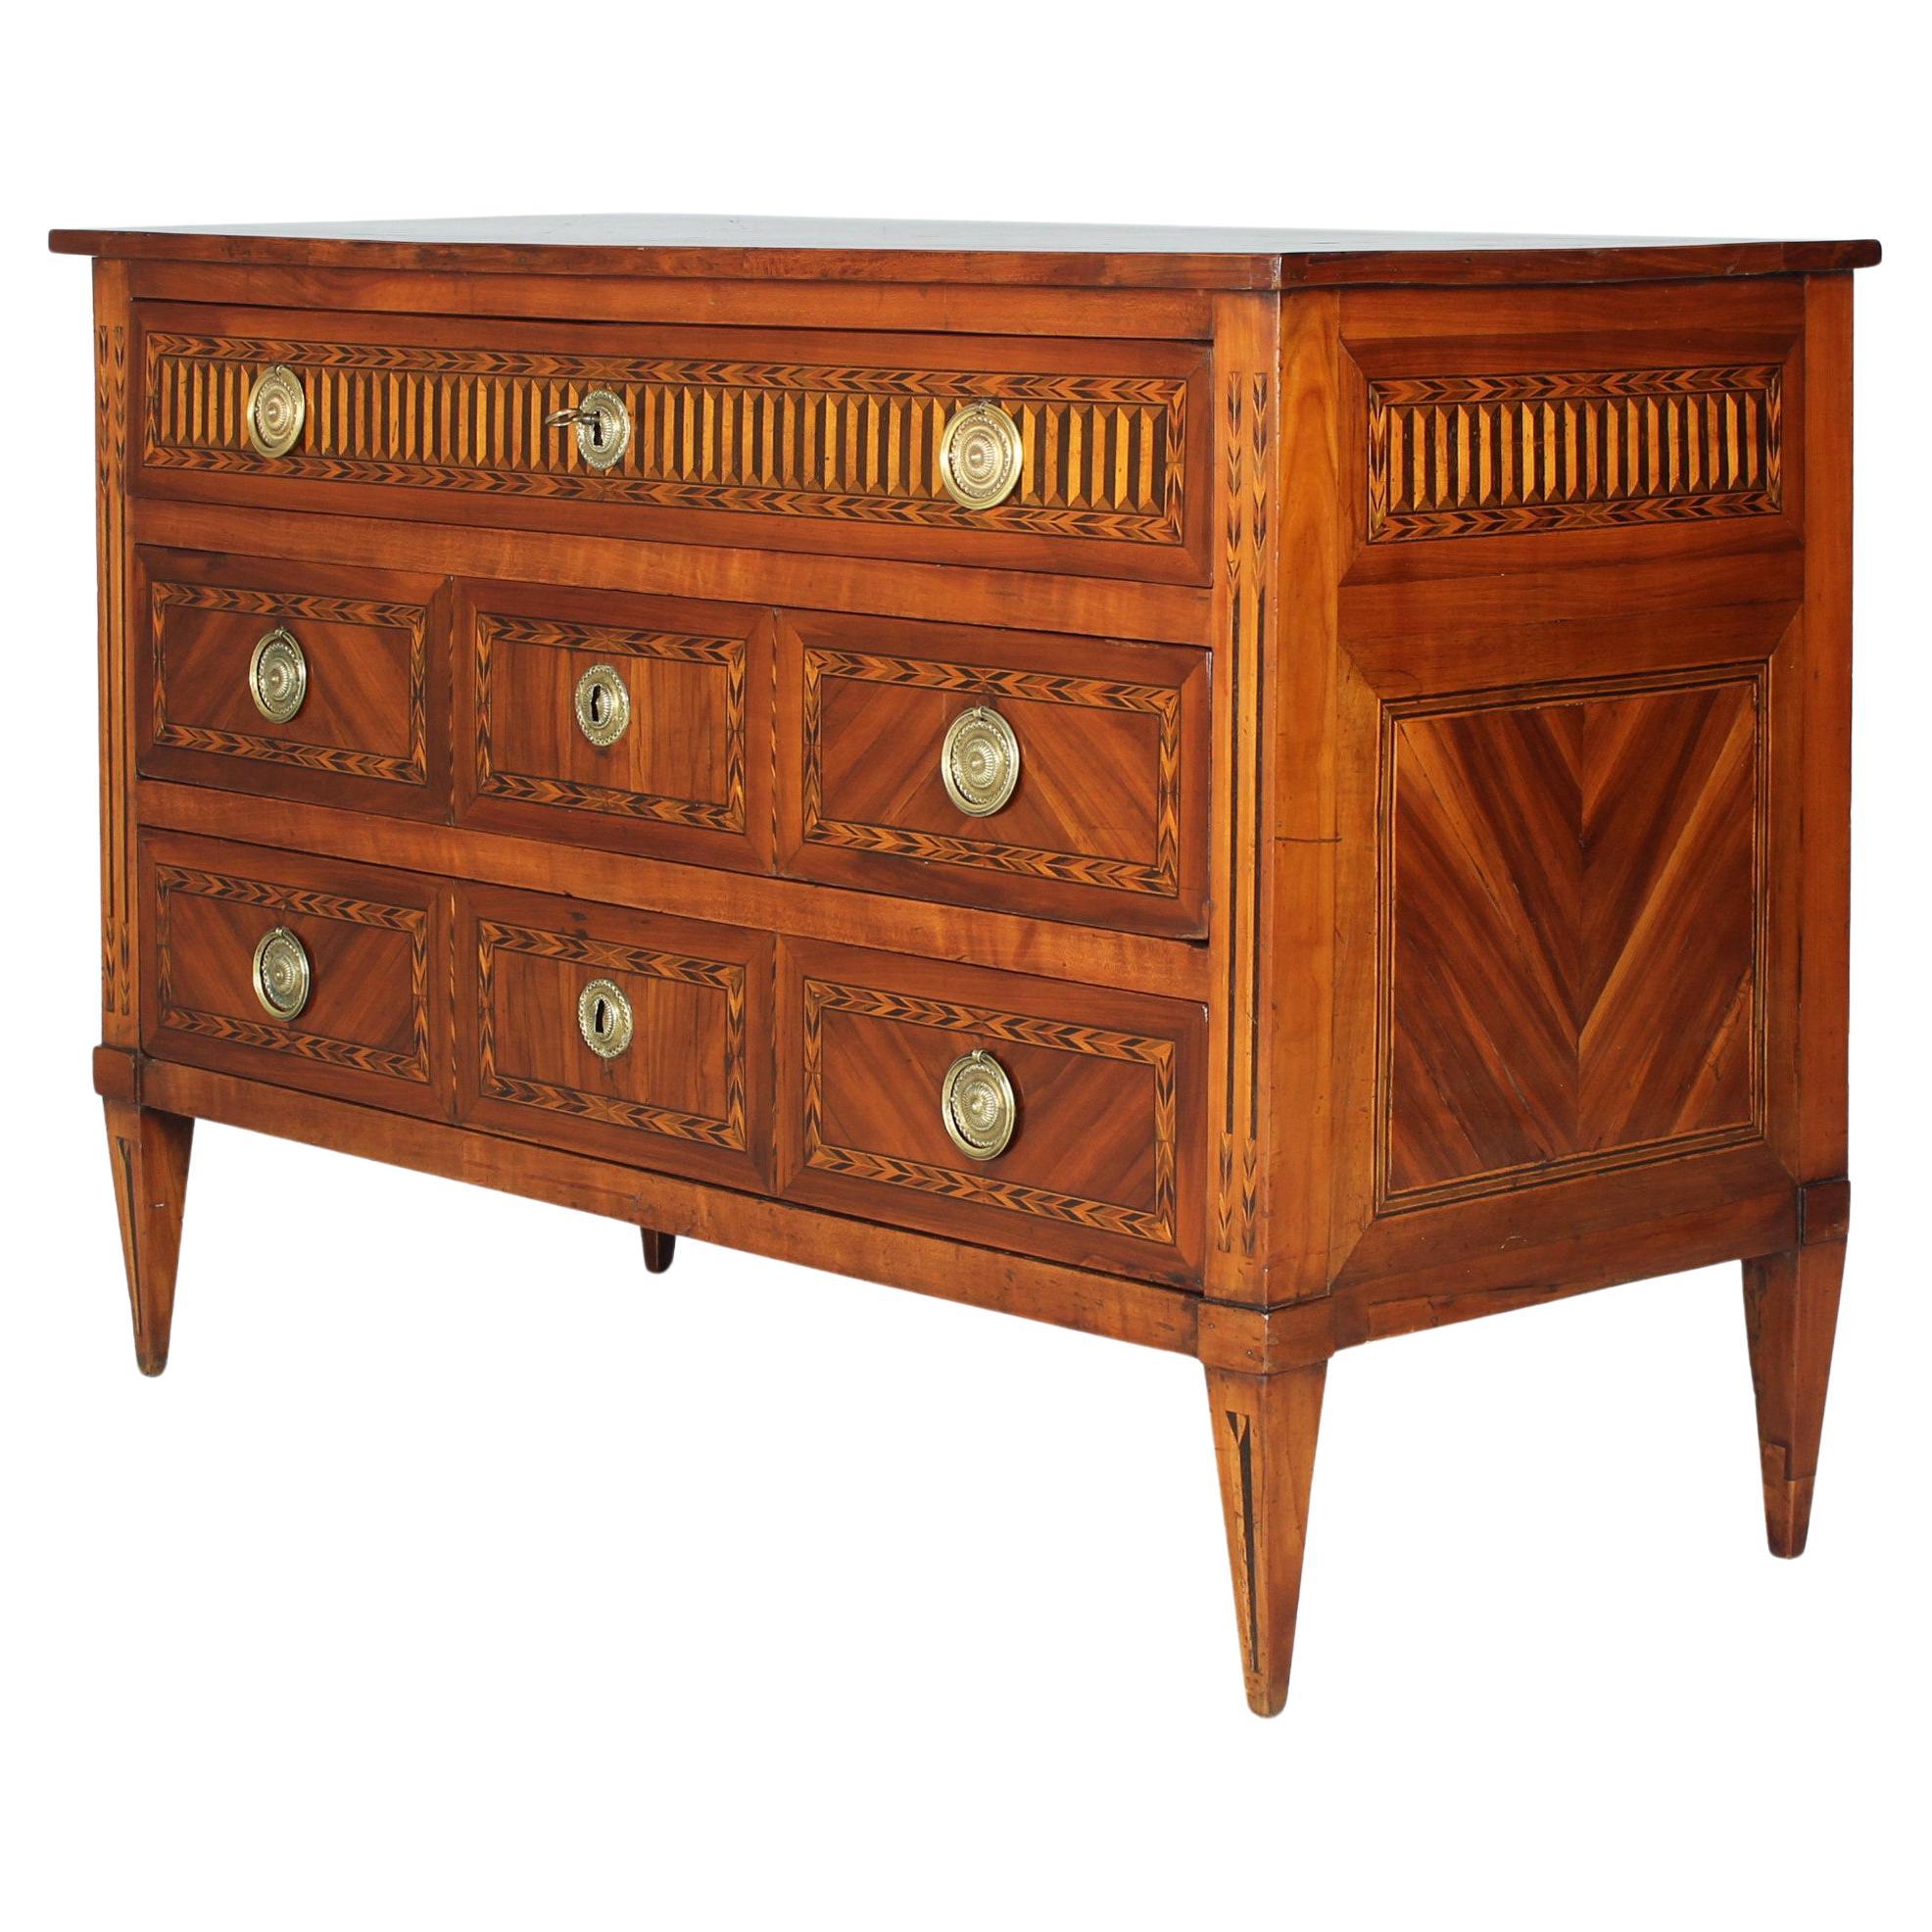 Louis XVI Chest of Drawers with Secretary Compartment, Fine Marquetry, c. 1780